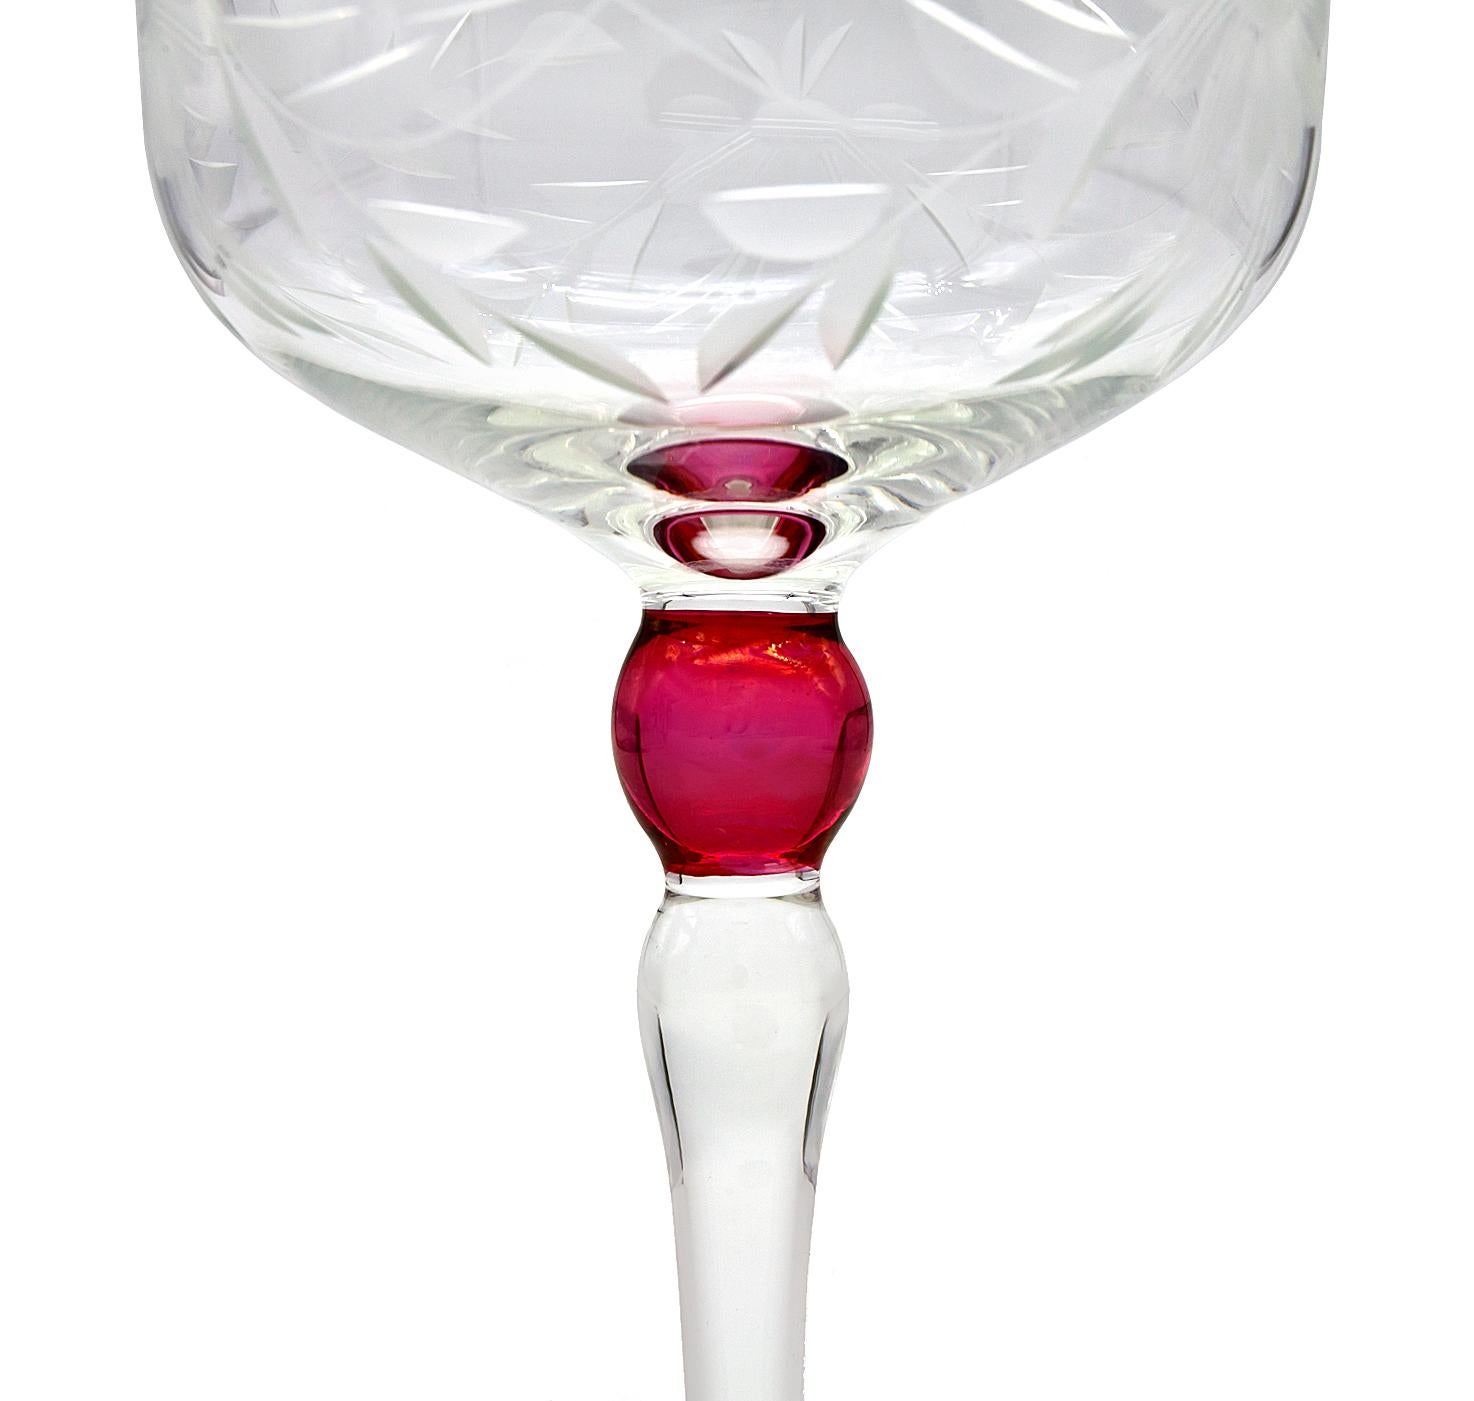 Hand cut crystal champagne coupes, sparkling clarity and elegance. Glasses feature diagonal cuts reminiscent of leaves. Ruby red accent on stem. In great condition.